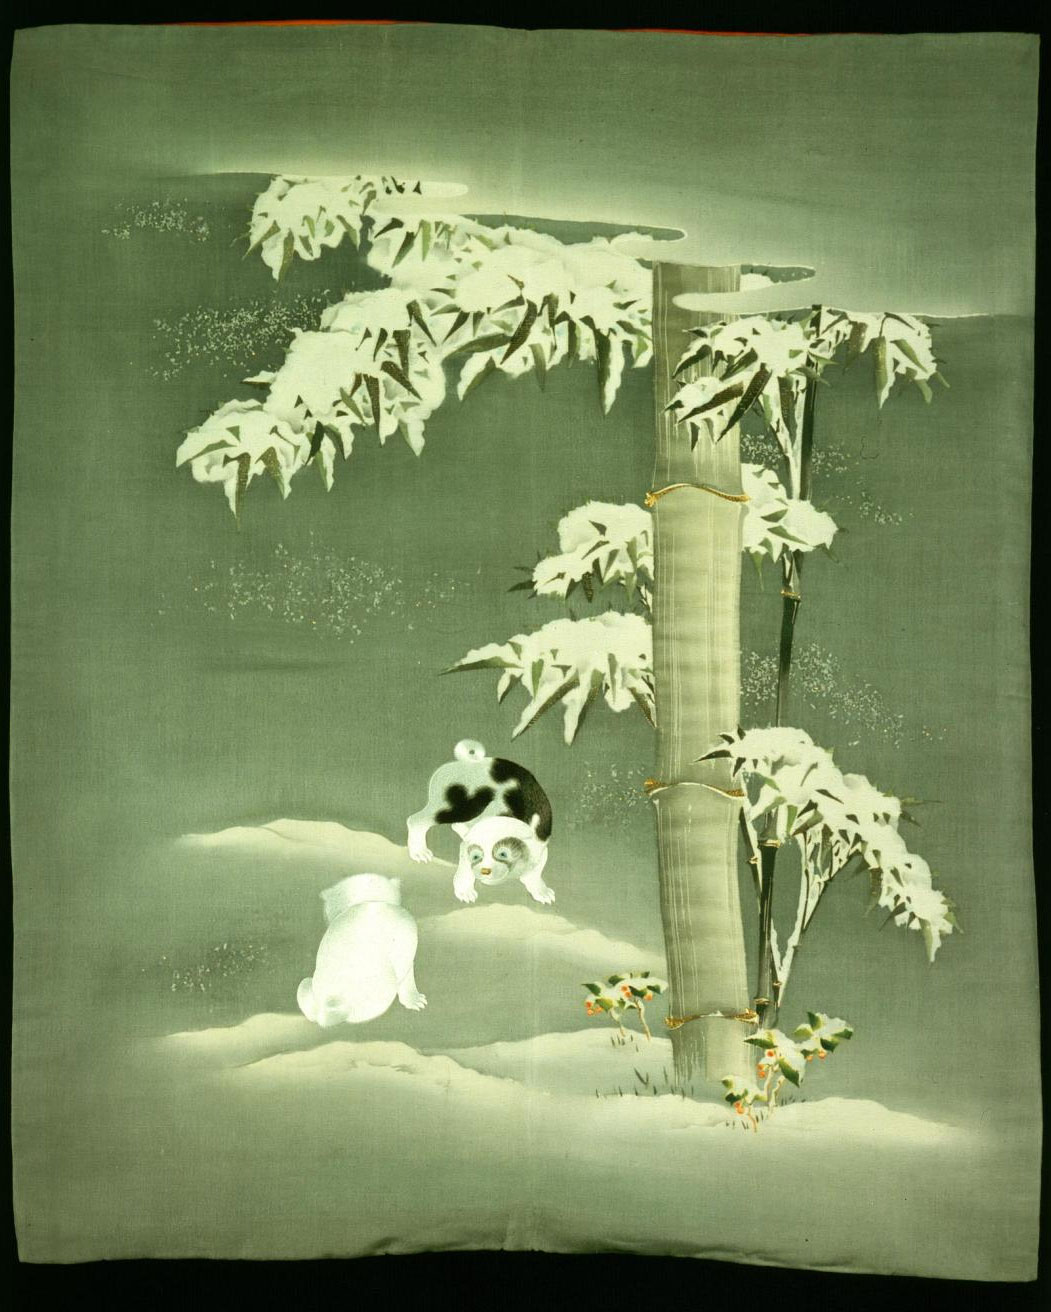 Silk fukusa (gift cover) with a design of two puppies beneath bamboo and holly in the snow: Japan, 1868-1900.